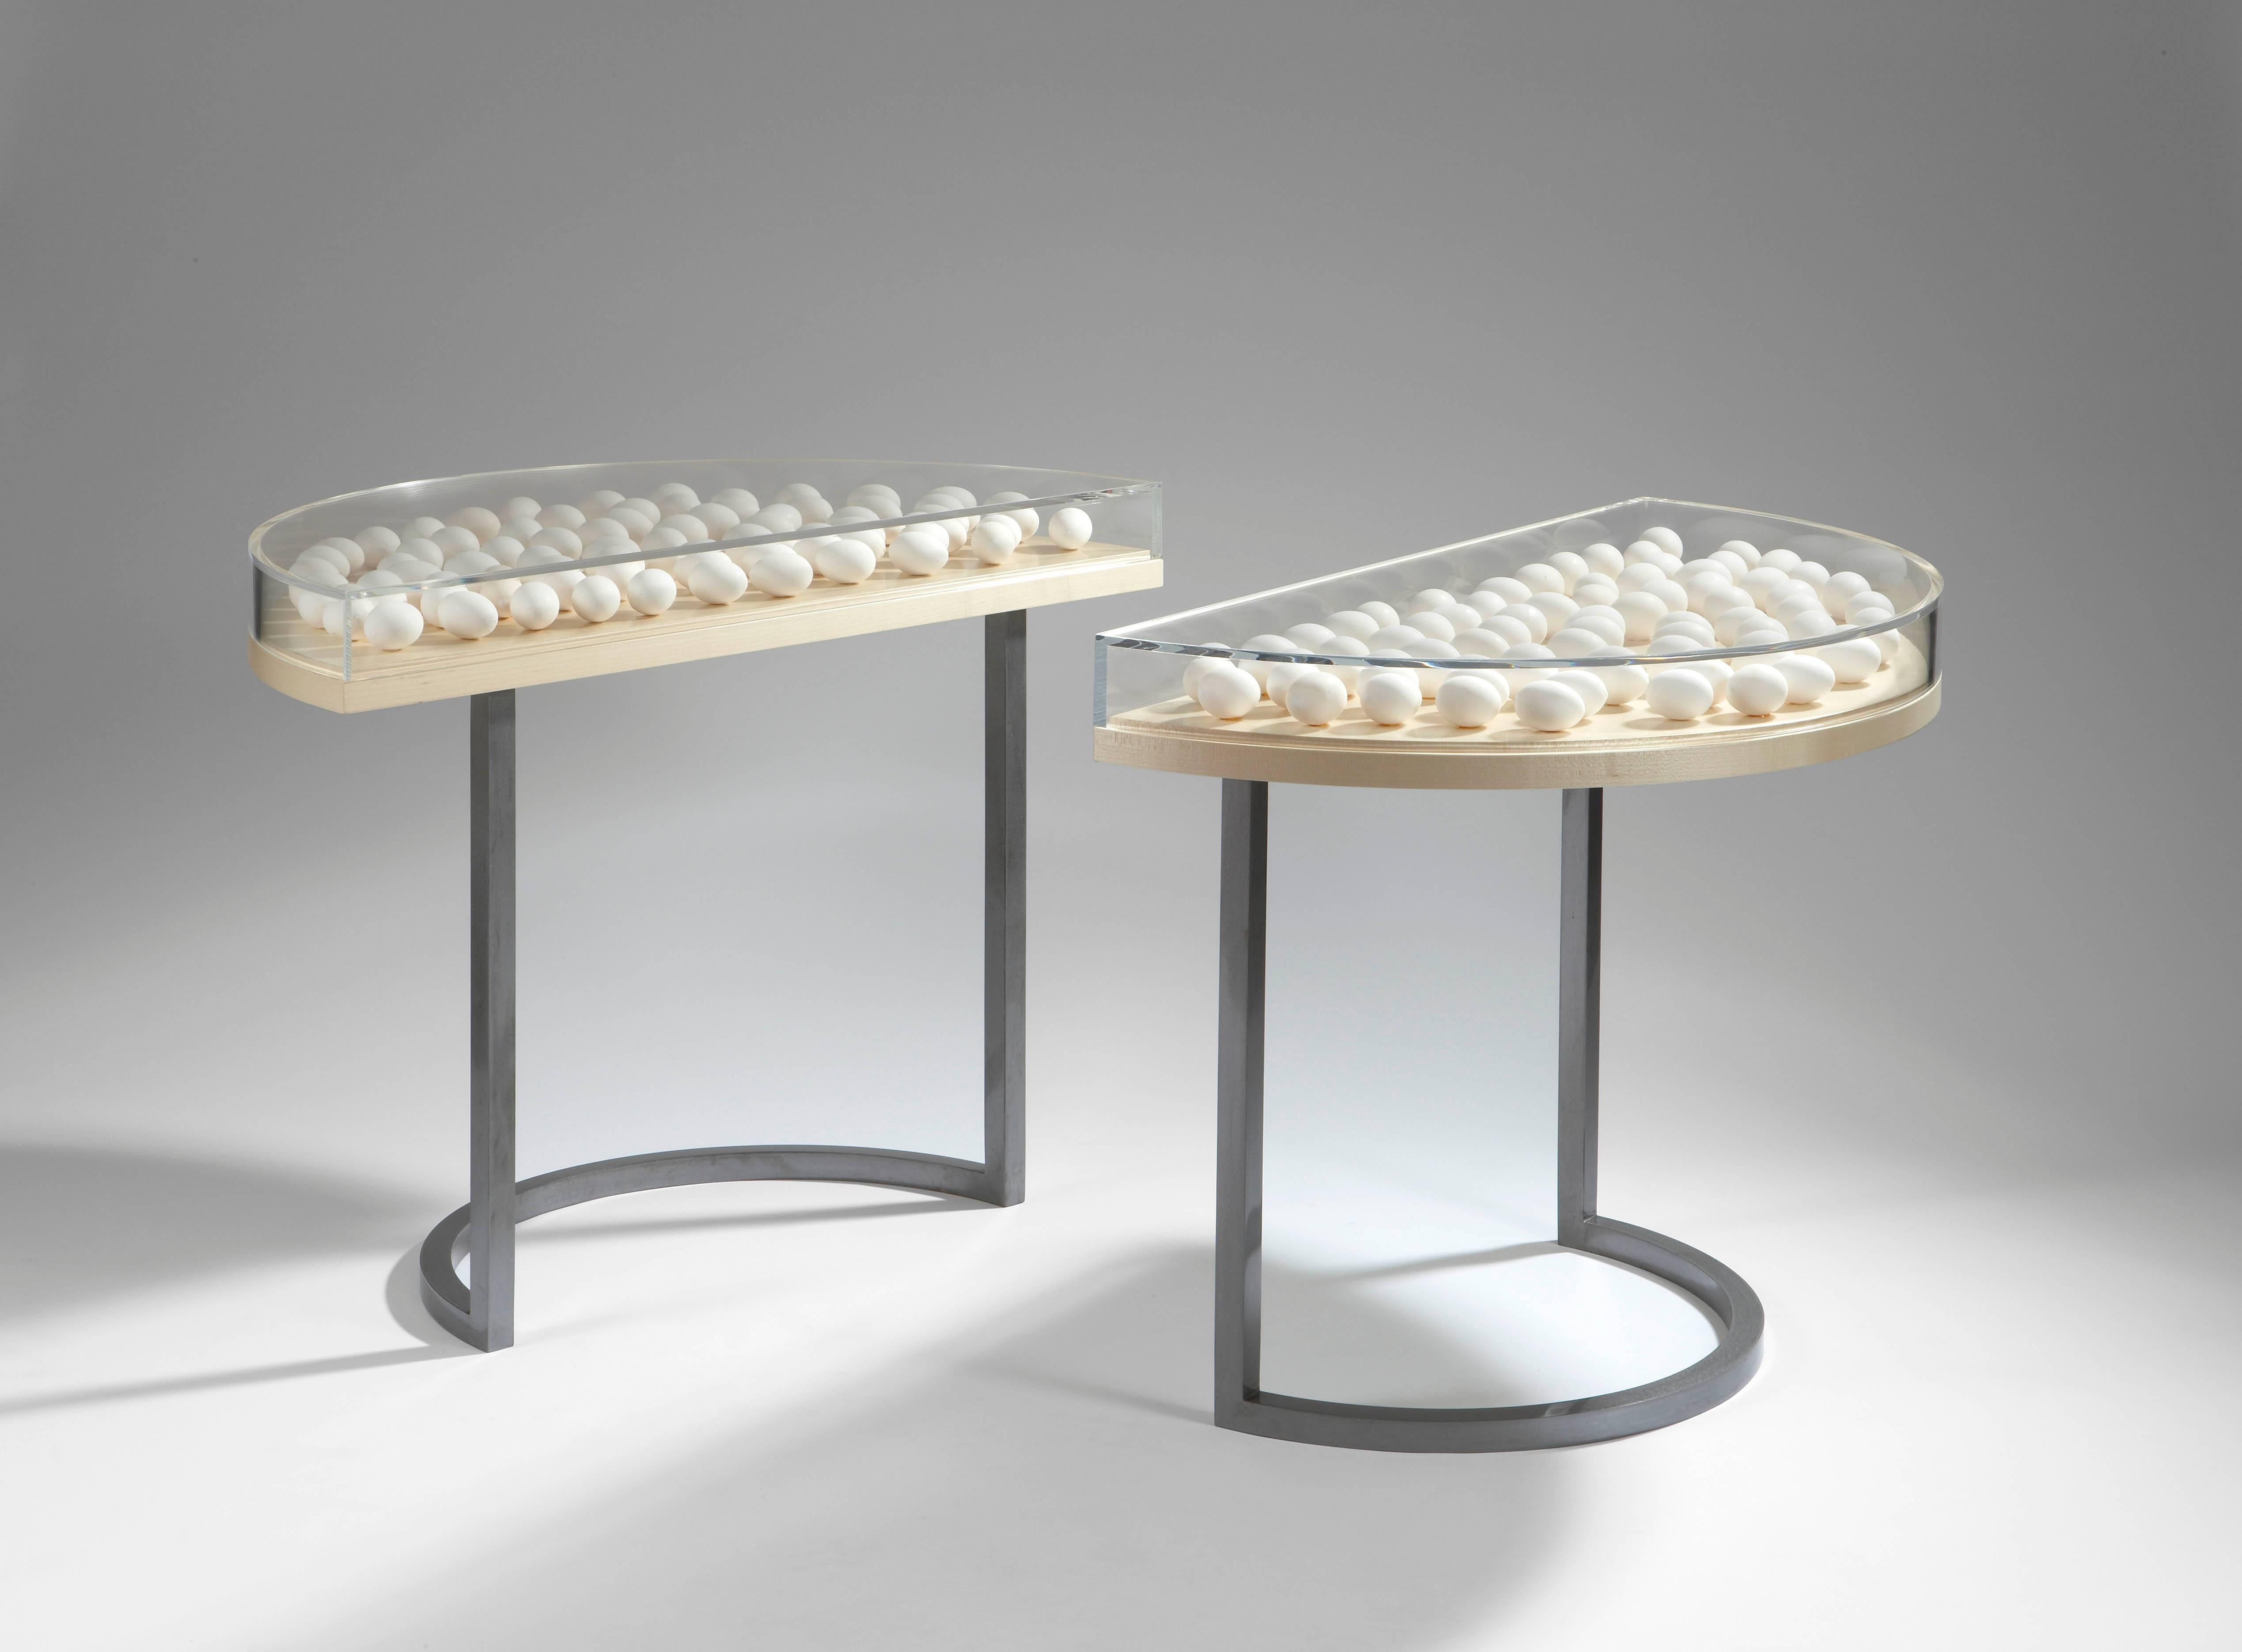 Egg table
Console/ round table.
Cat-Berro edition 2008
Top in plexiglass and sycamore. Eggs. Steel base.
Measure: O 100cm, H 73cm.
Création 2008.
One off piece

Pricing does not include sales tax (French VAT) if applicable.